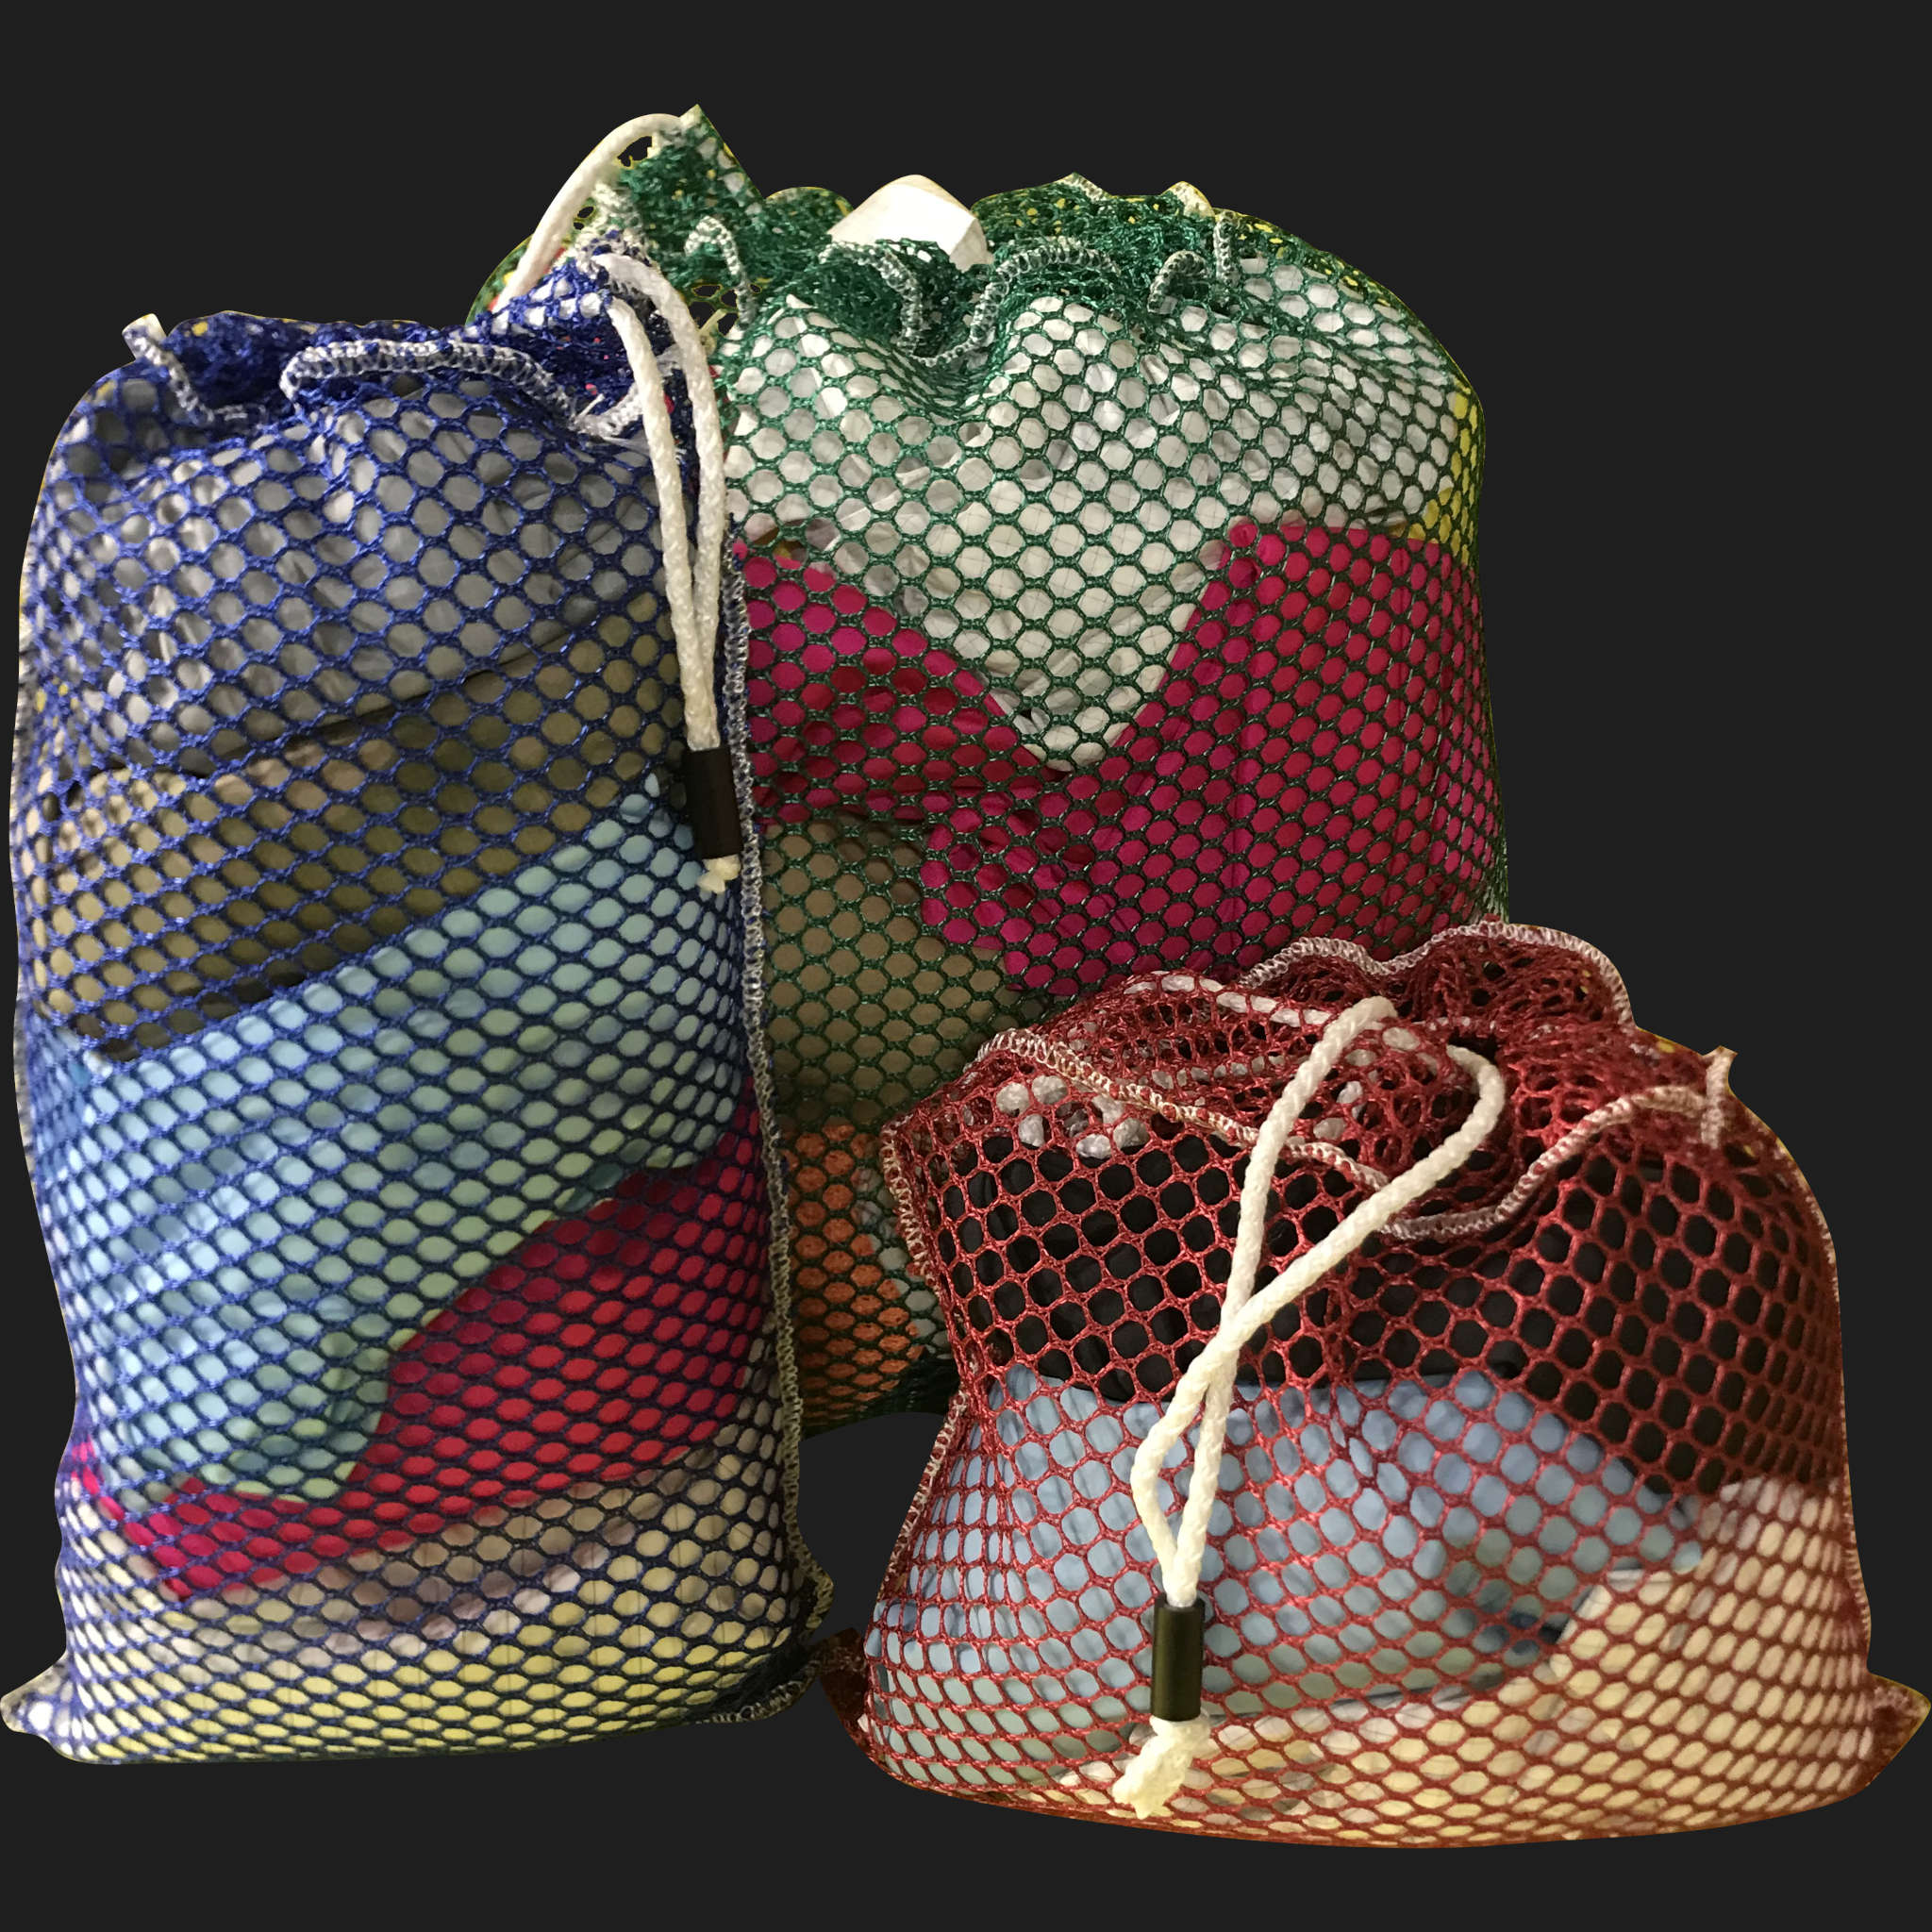 54" x 70" Customized Mesh-Net-Laundry Bags Heavy Duty with Cord and barrellock closure